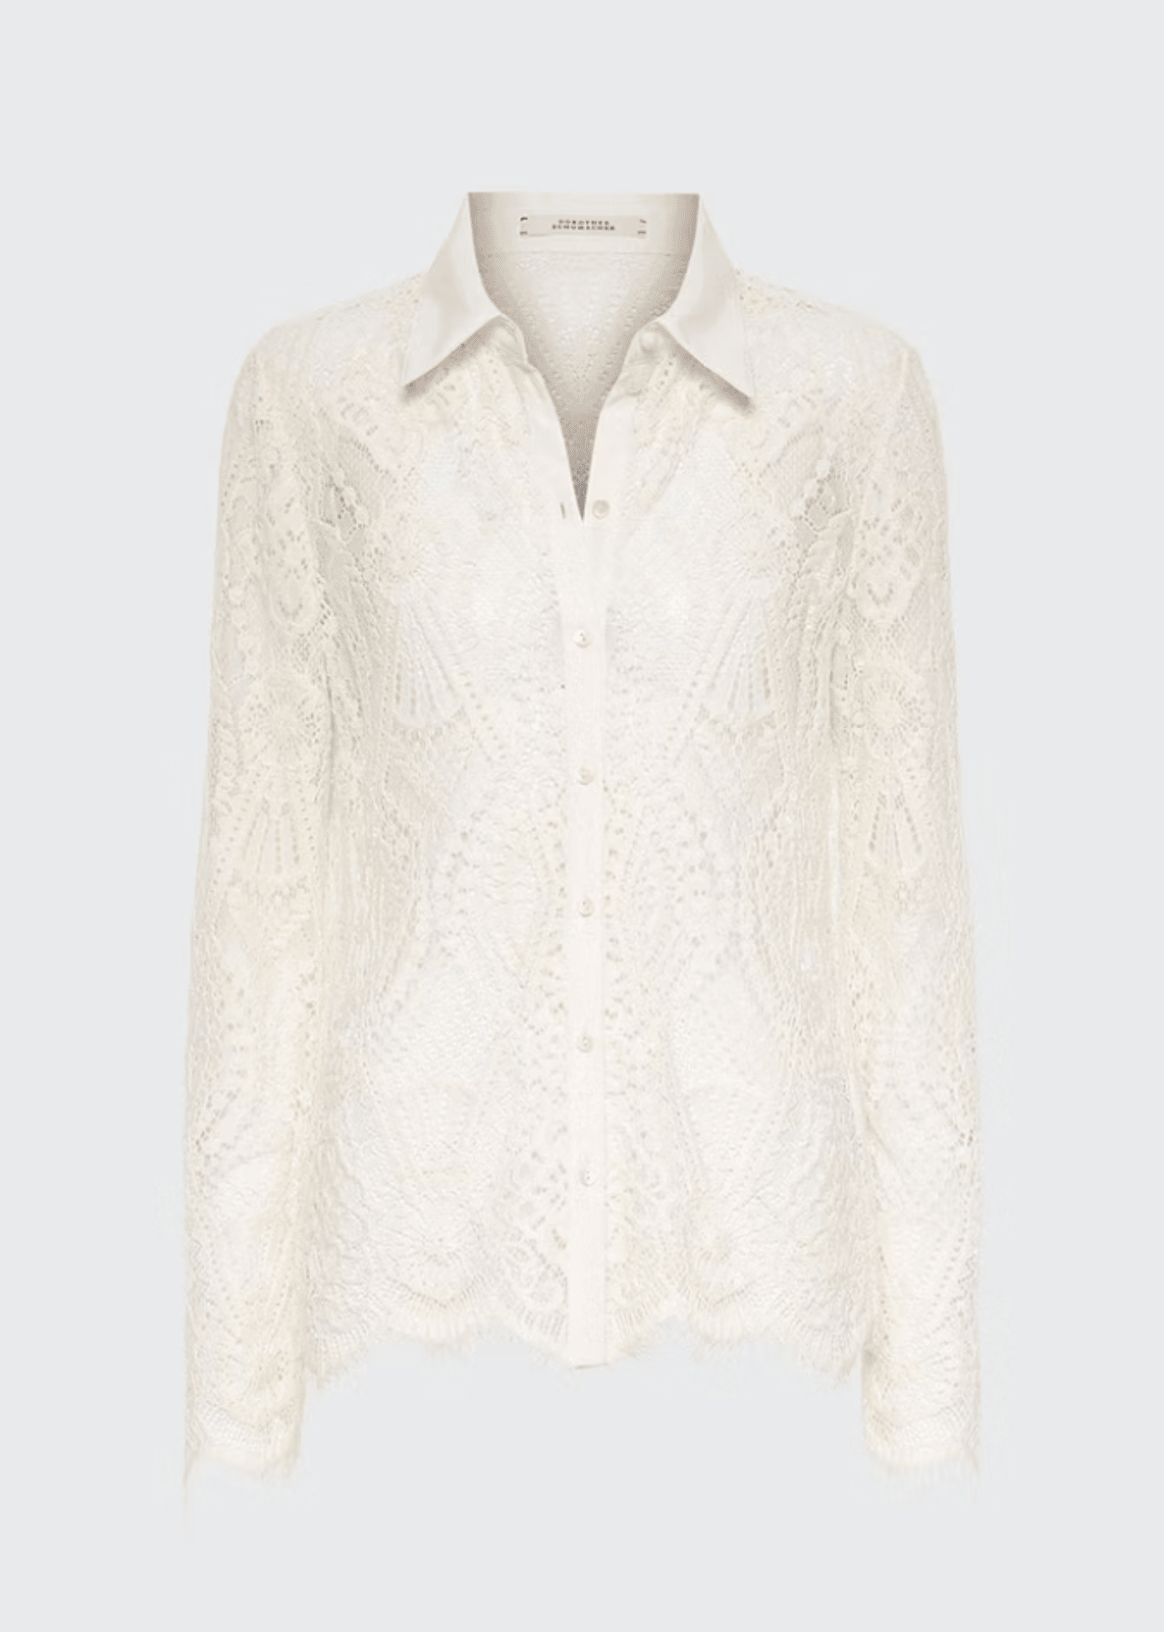 Item of the week: the lace top